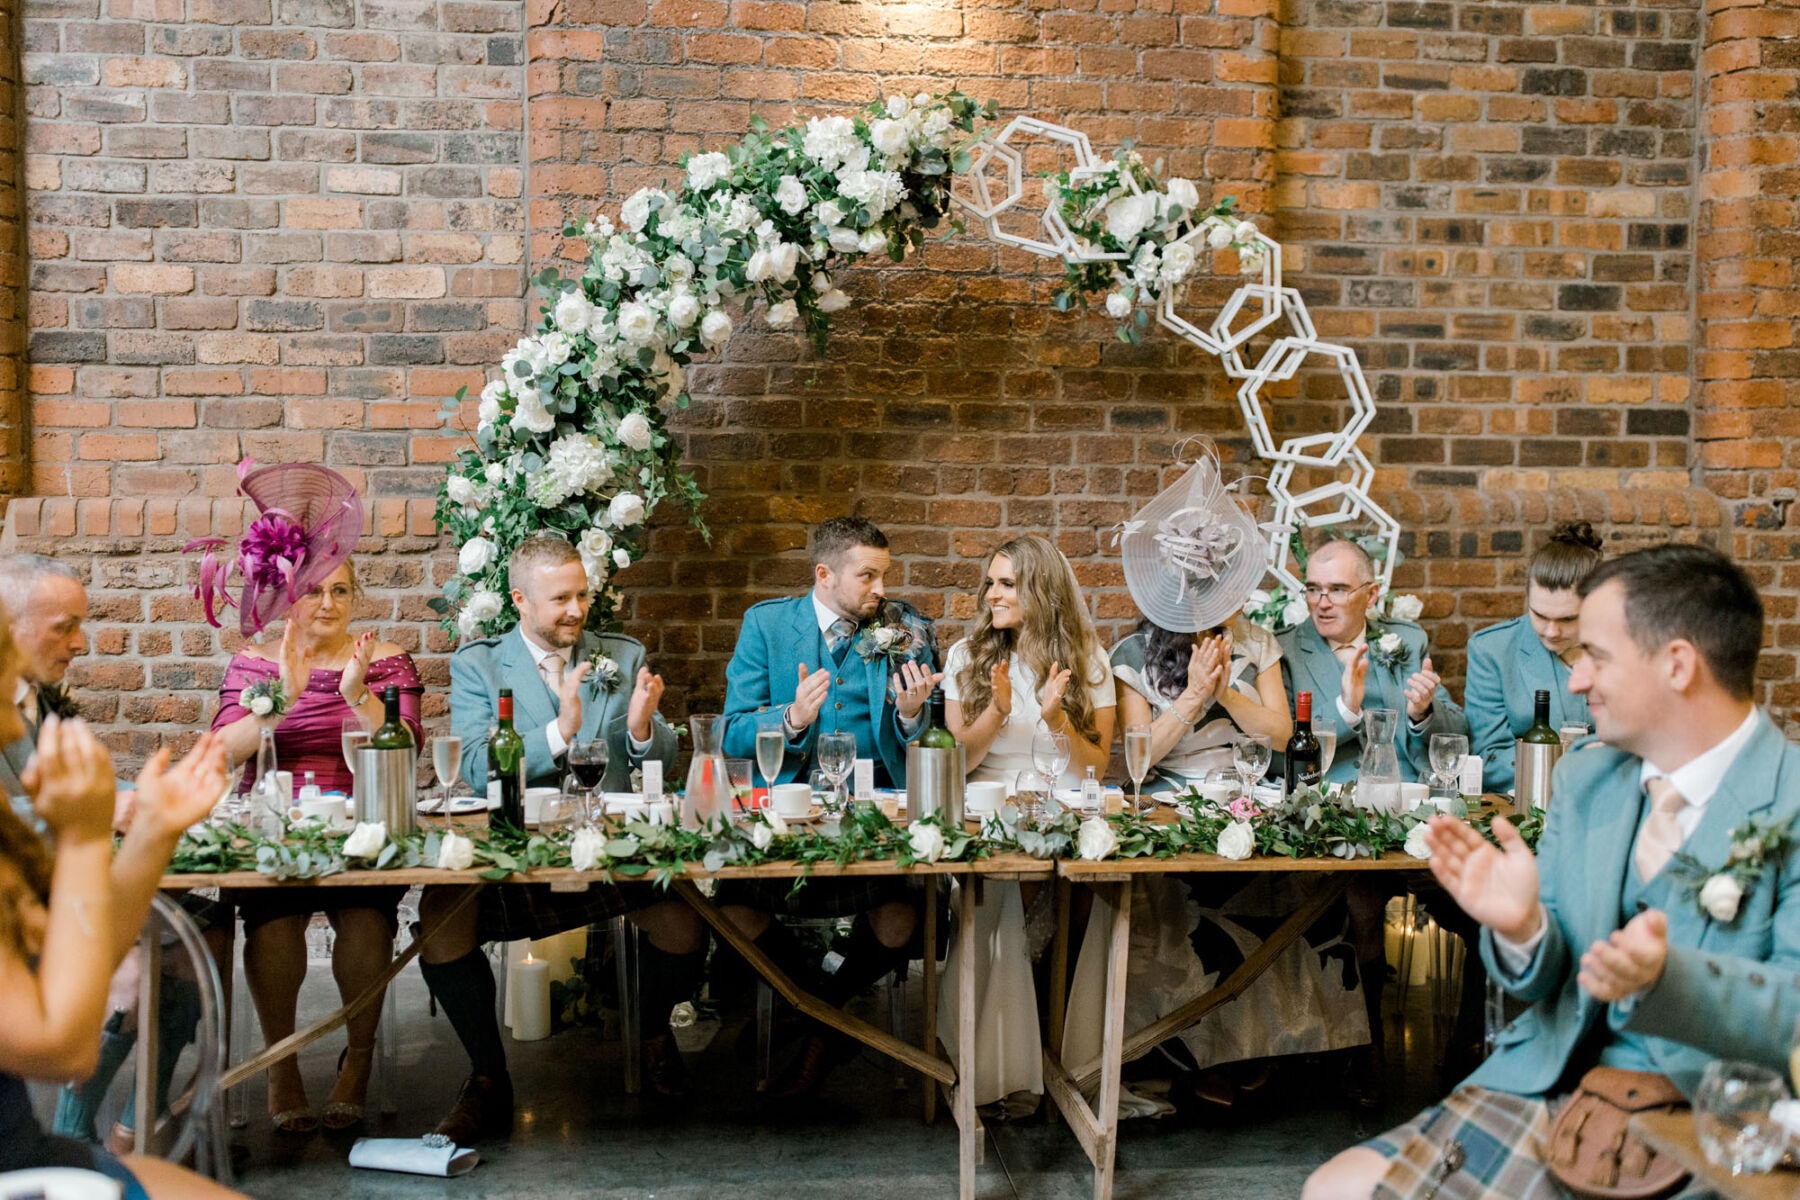 Top table with floral arch behind